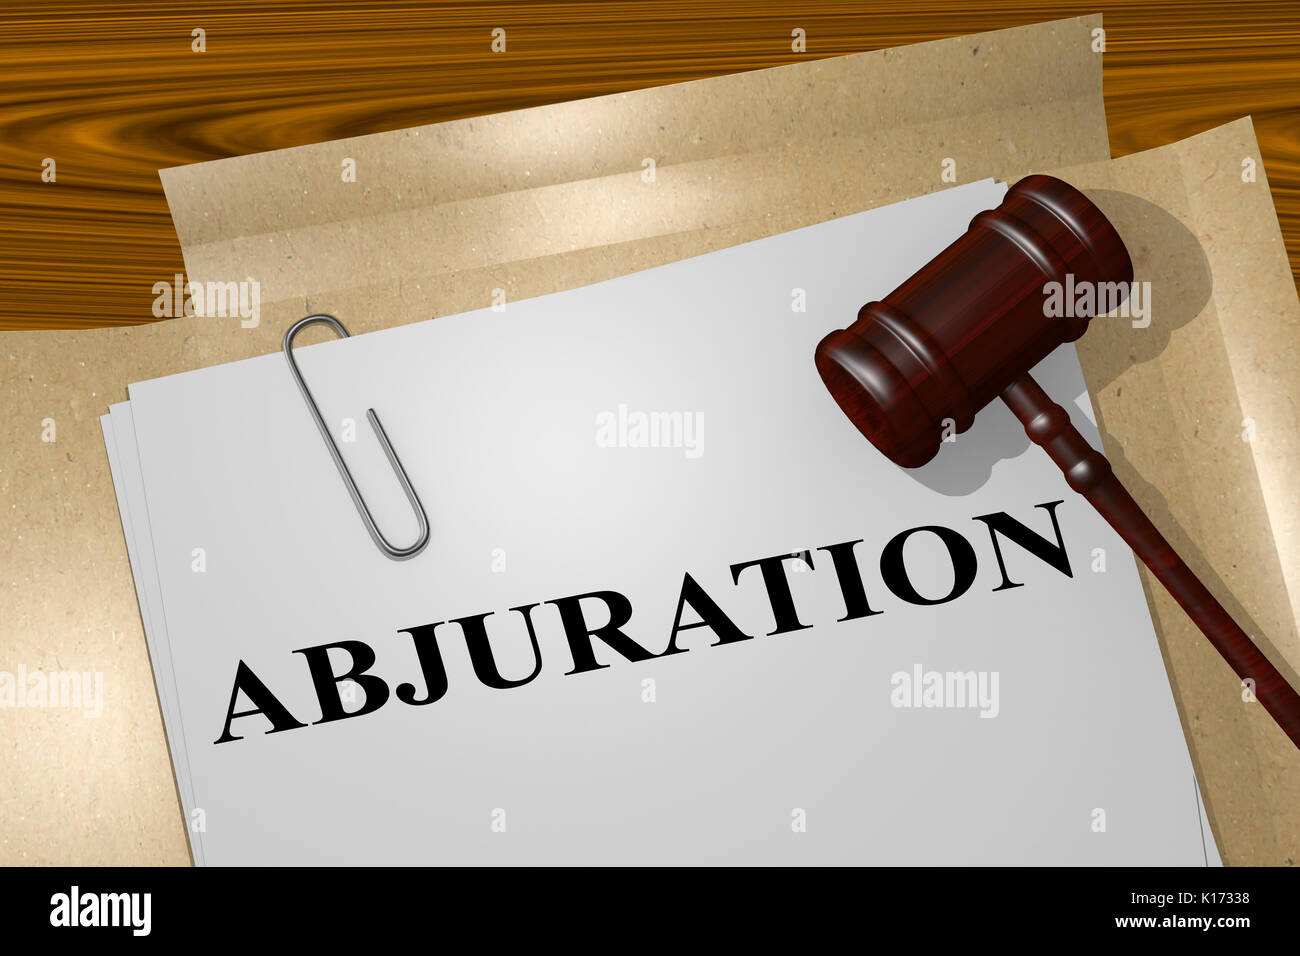 3D illustration of 'ABJURATION' title on legal document Stock Photo